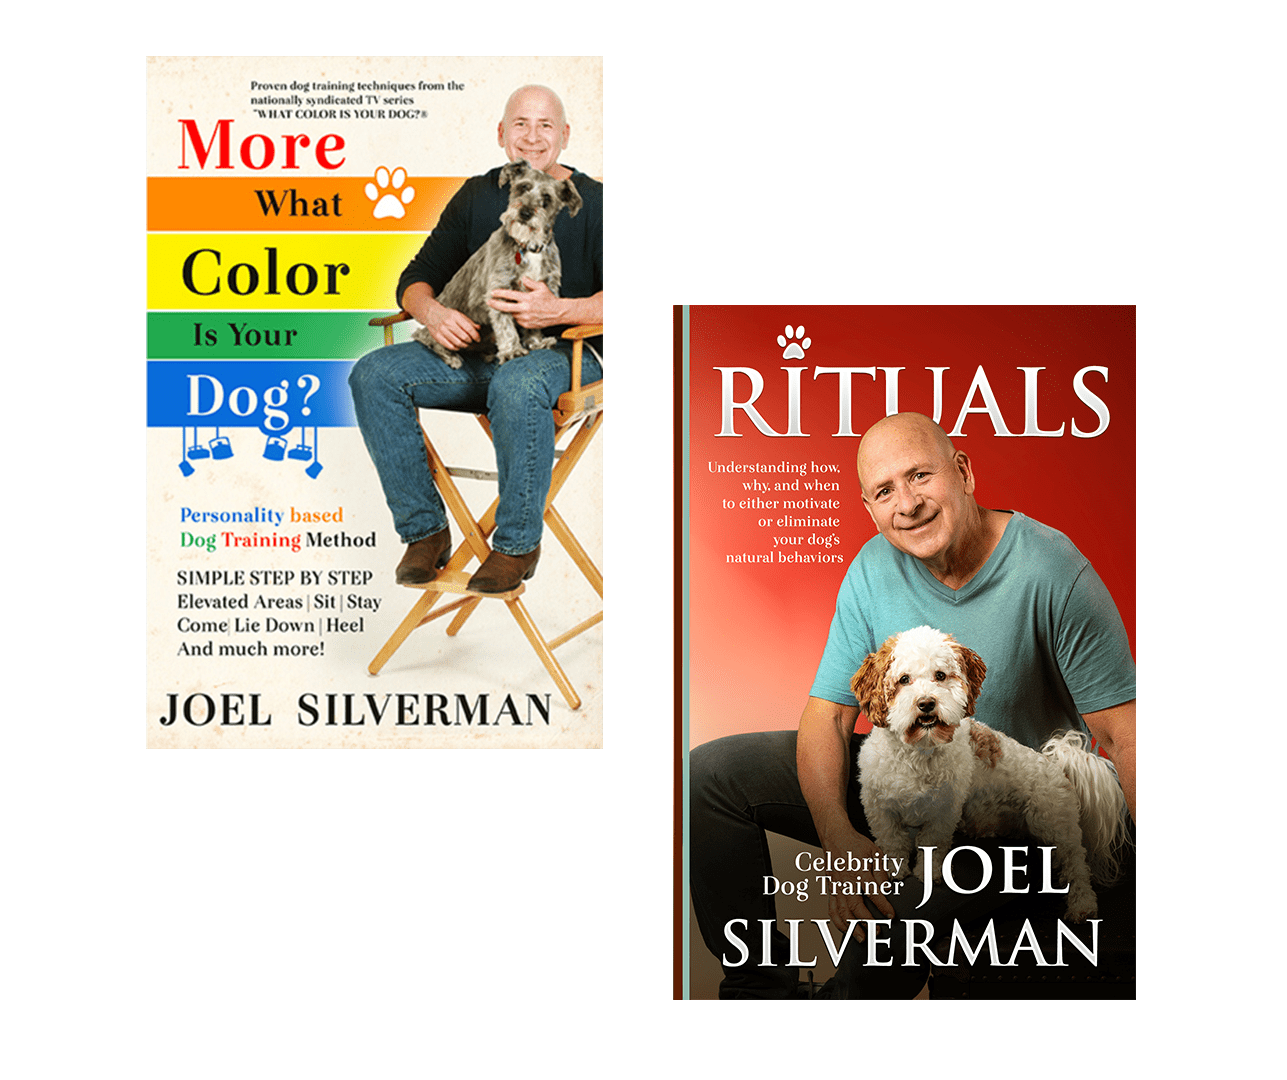 Rituals – More What Color is Your Dog?